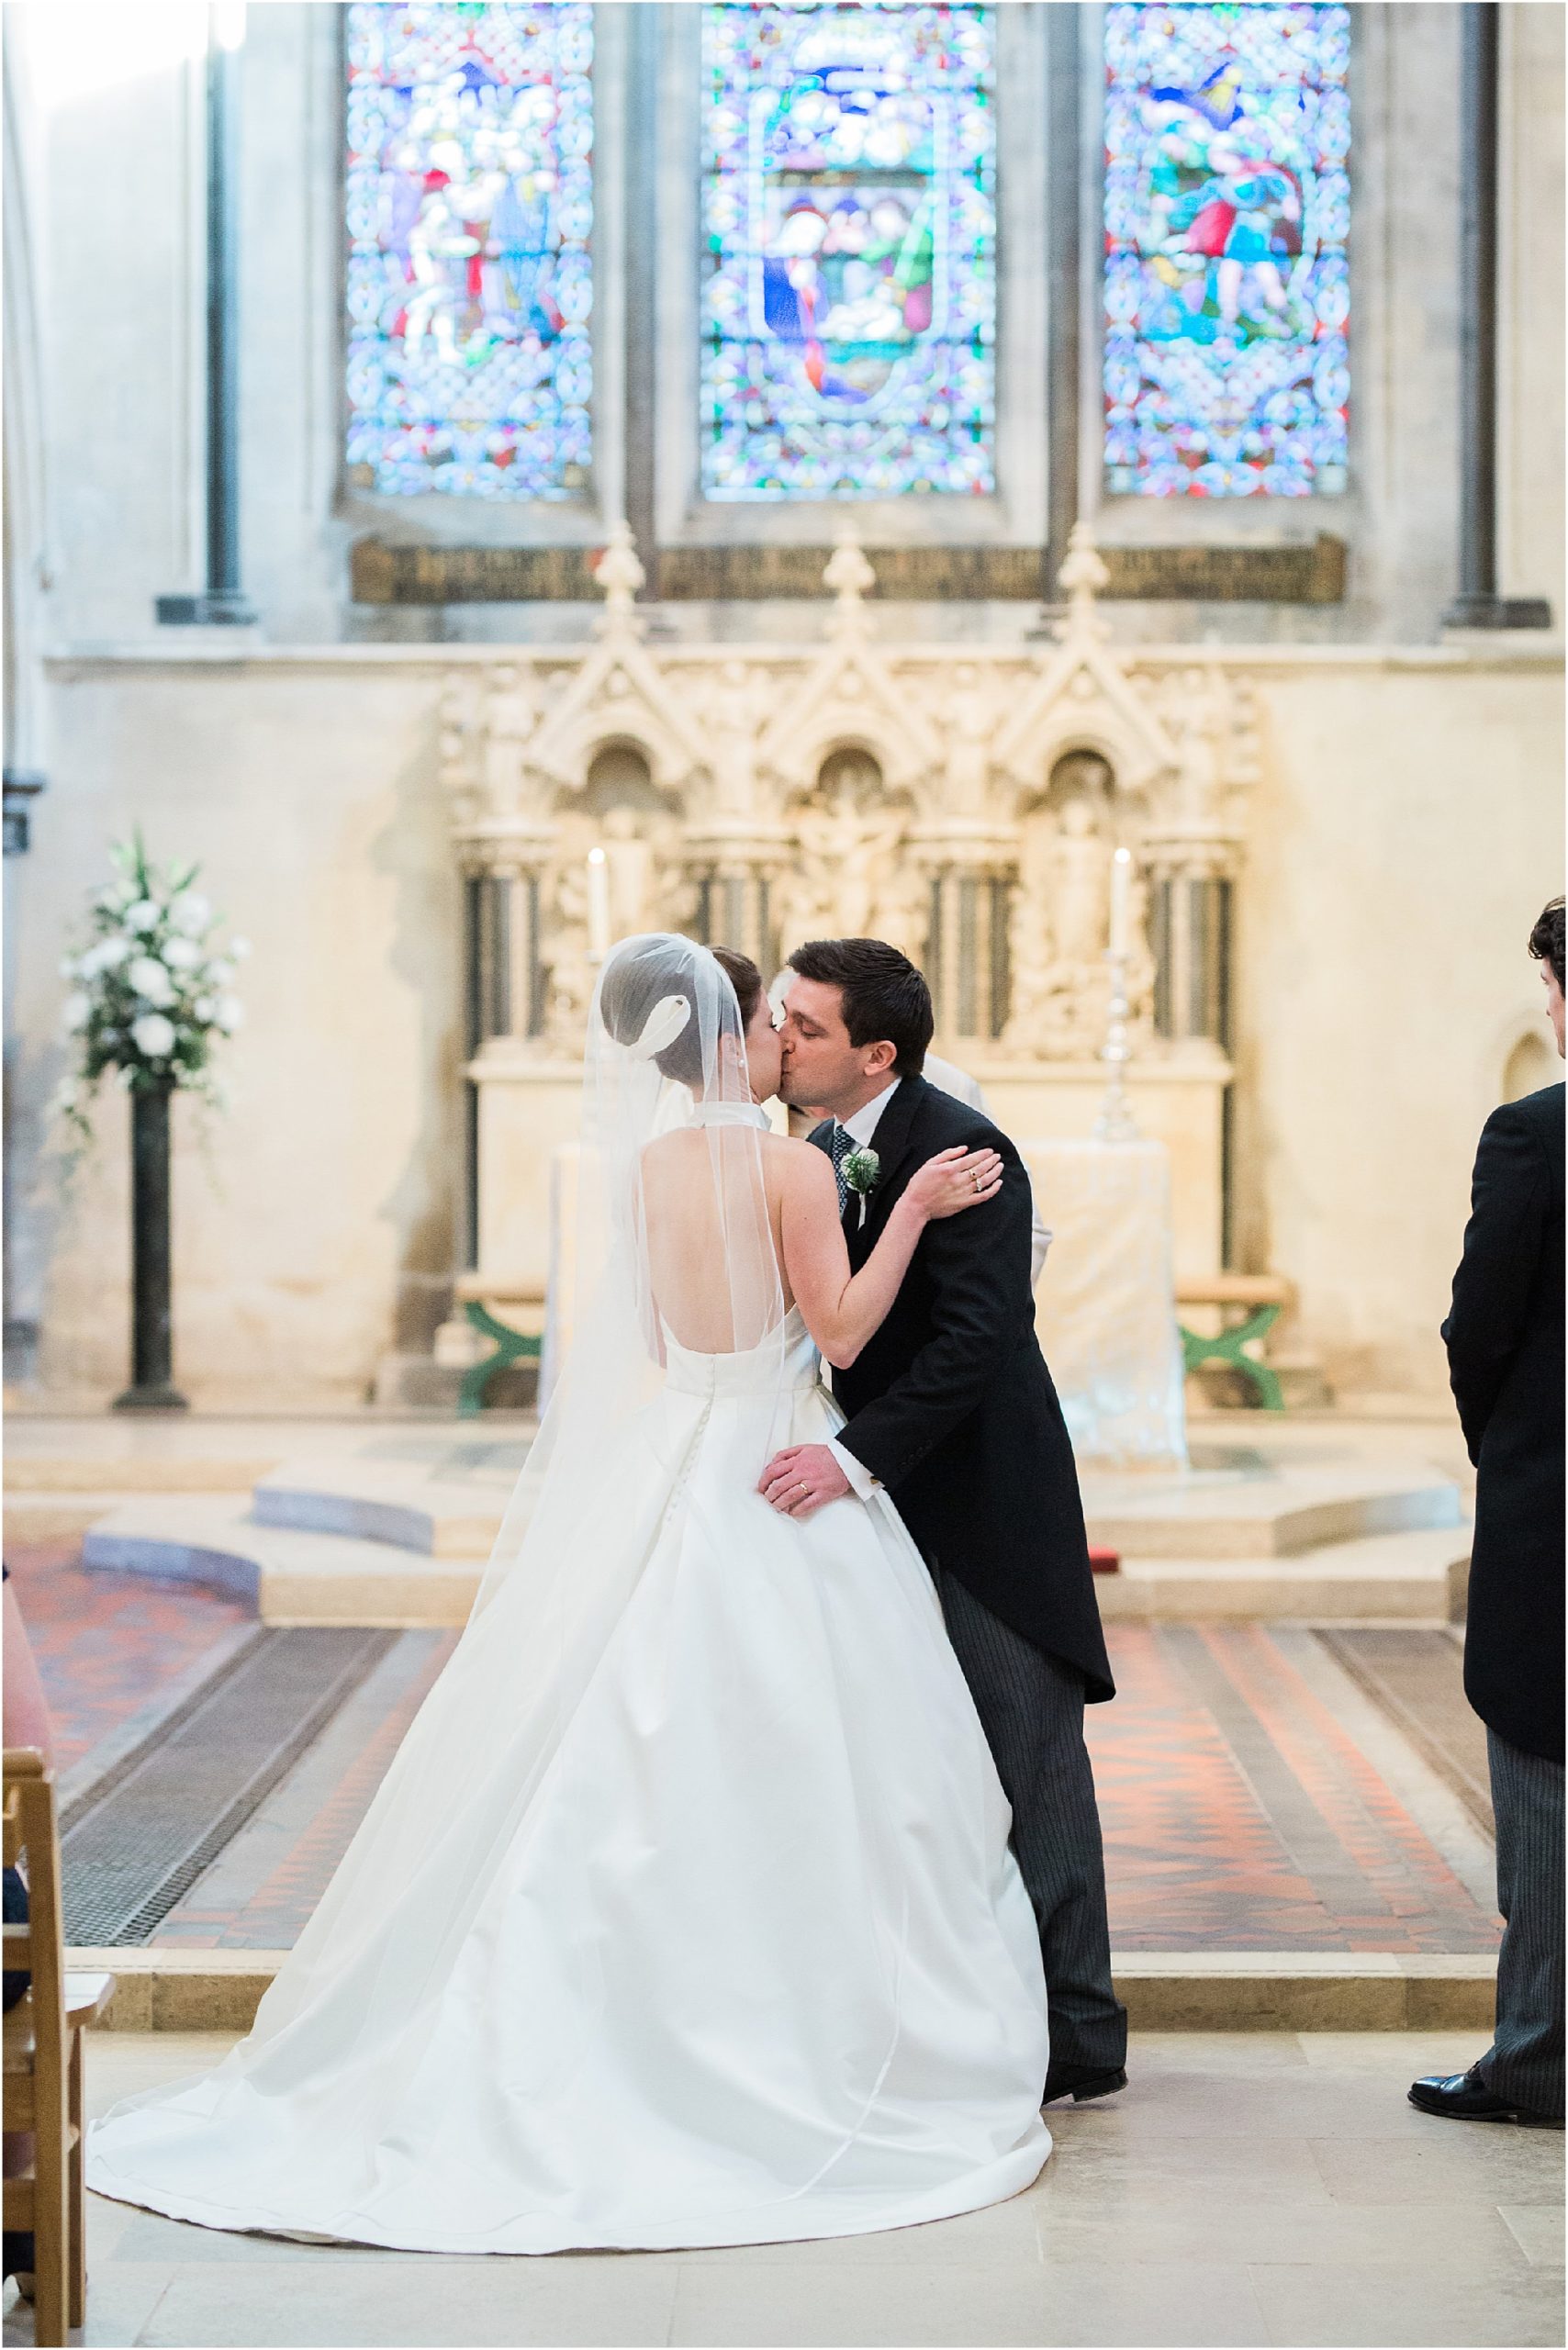 Bride and groom having first kiss at Boxgrove Priory wedding